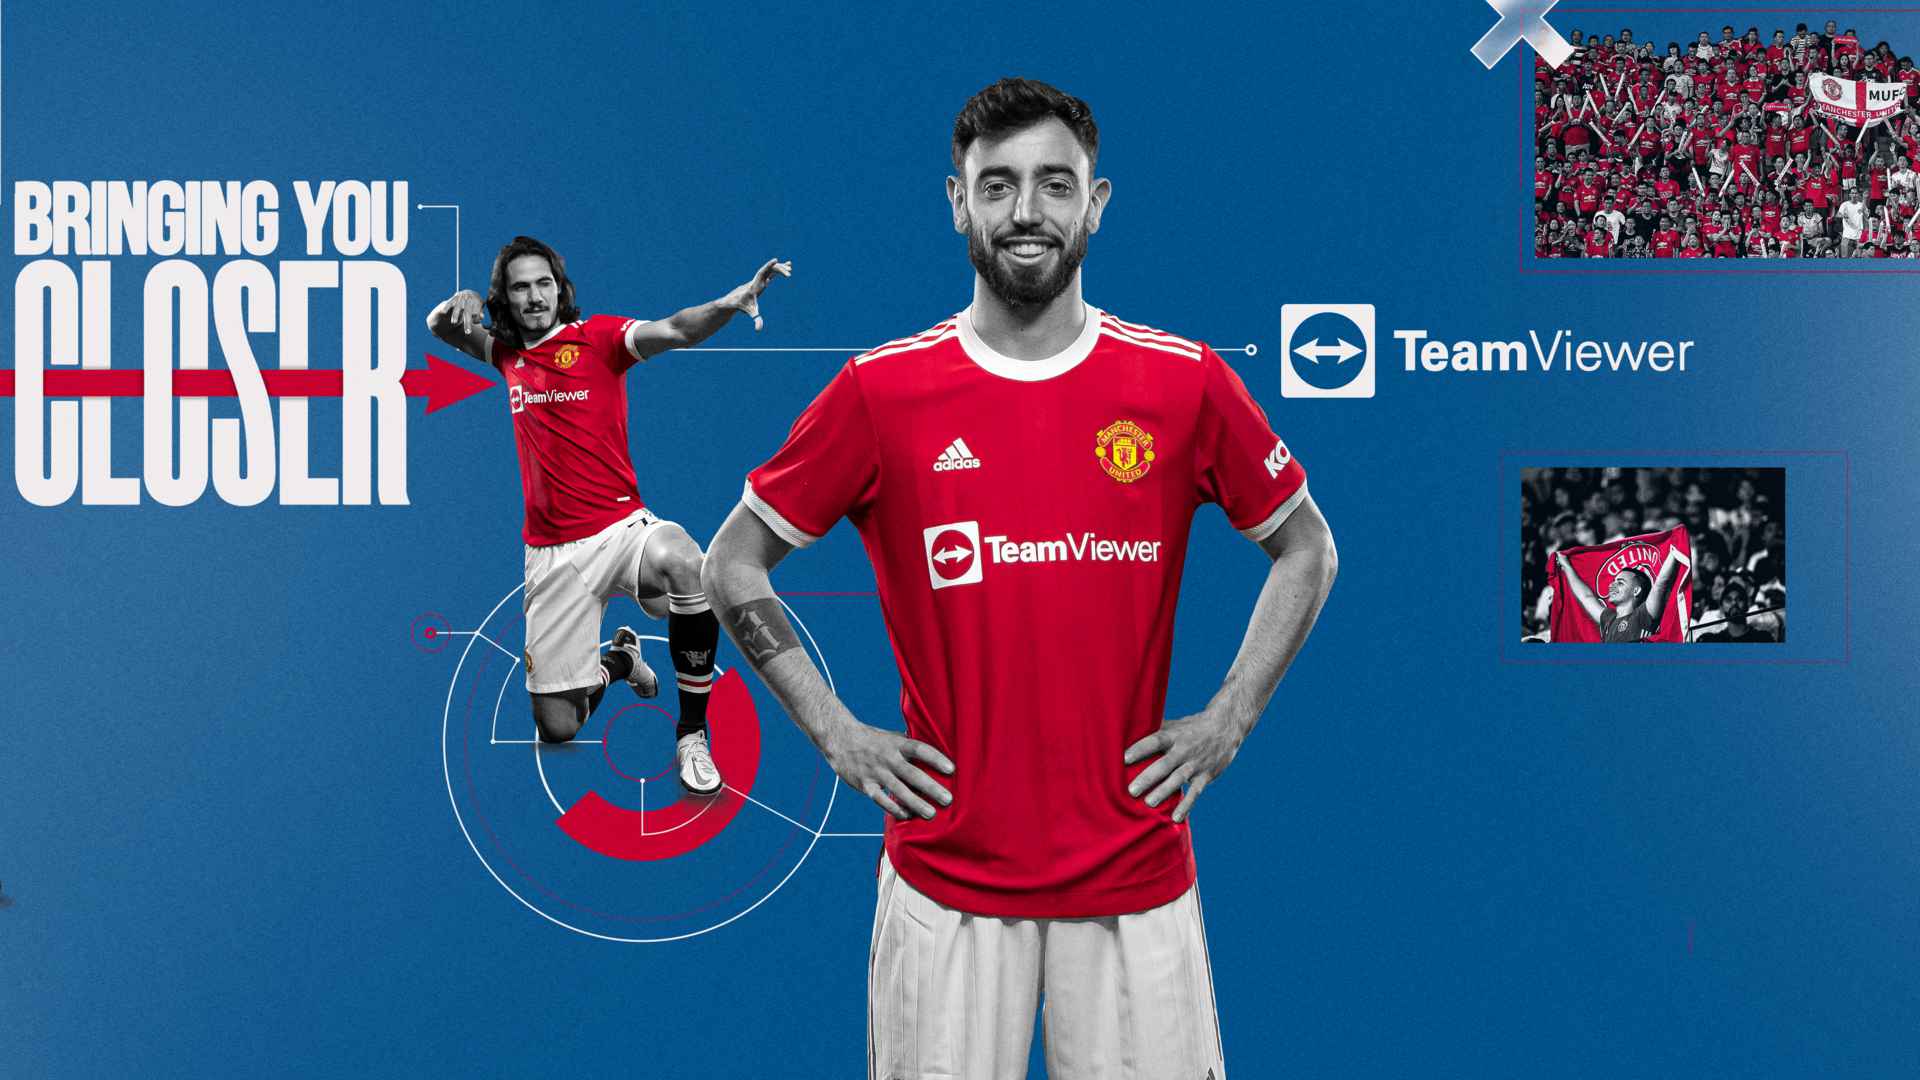 TeamViewer & Manchester United: A Team United